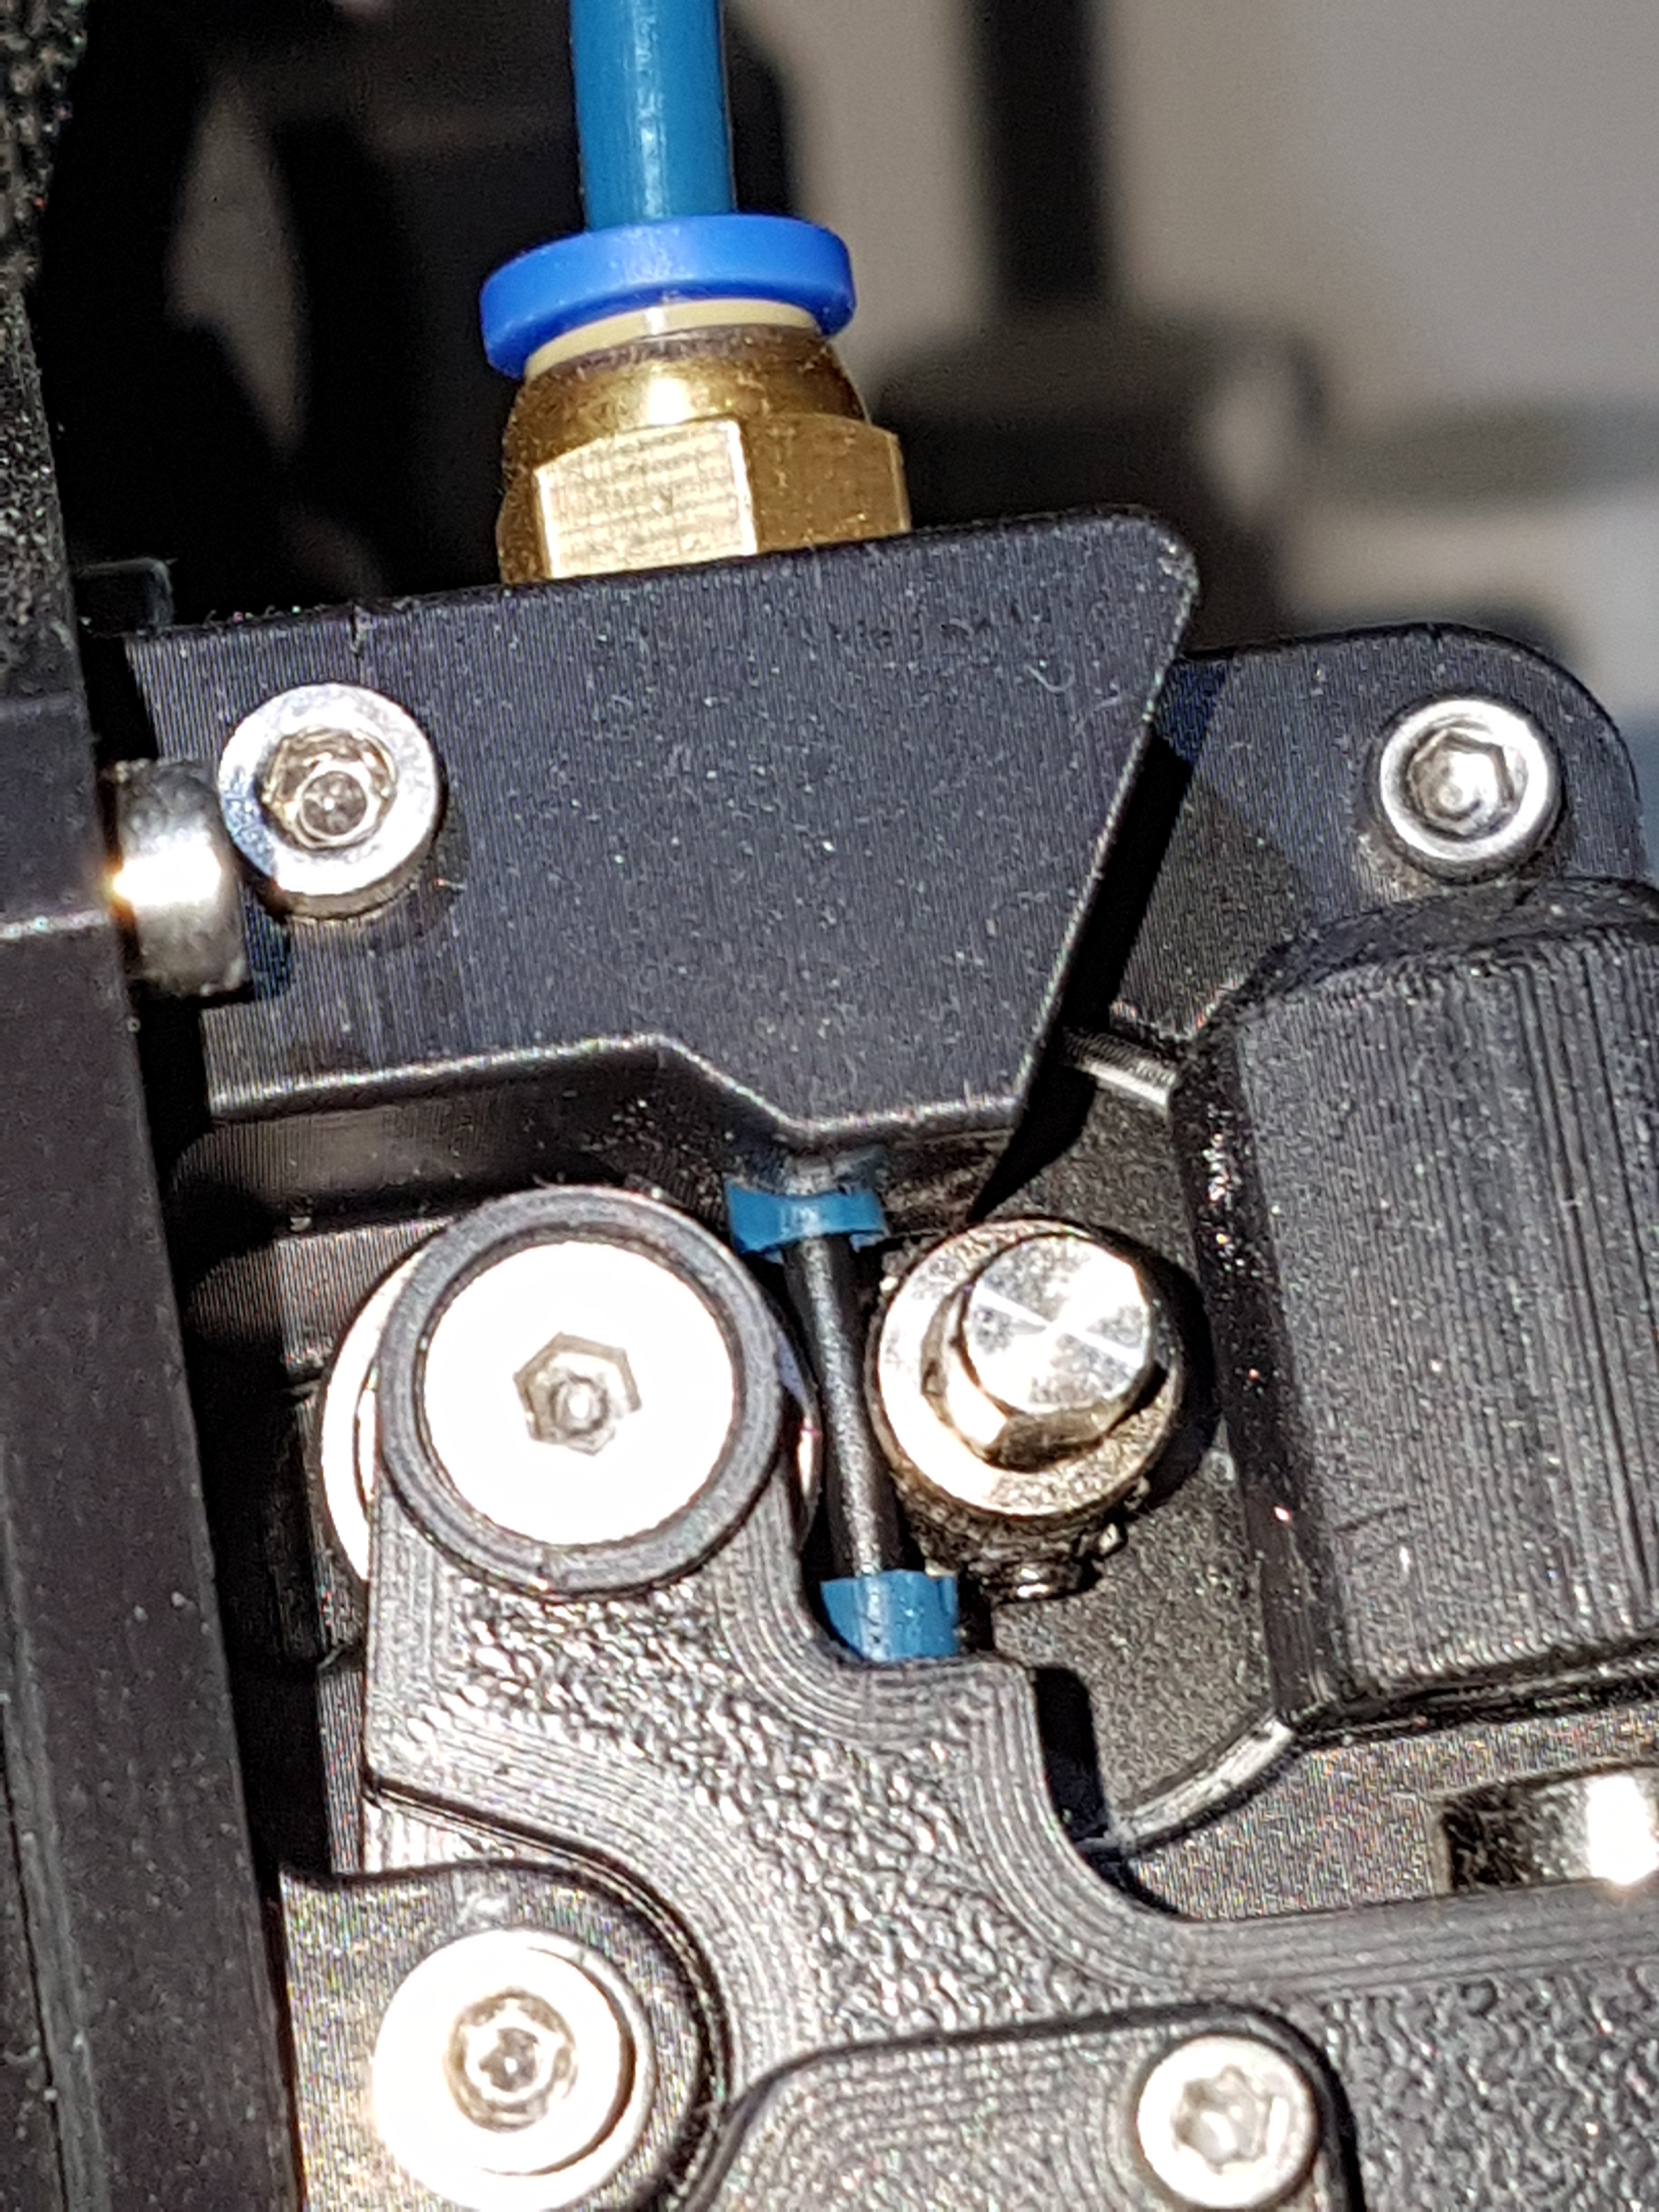 Technical name for brass olive – Hardware, firmware and software help –  Prusa3D Forum